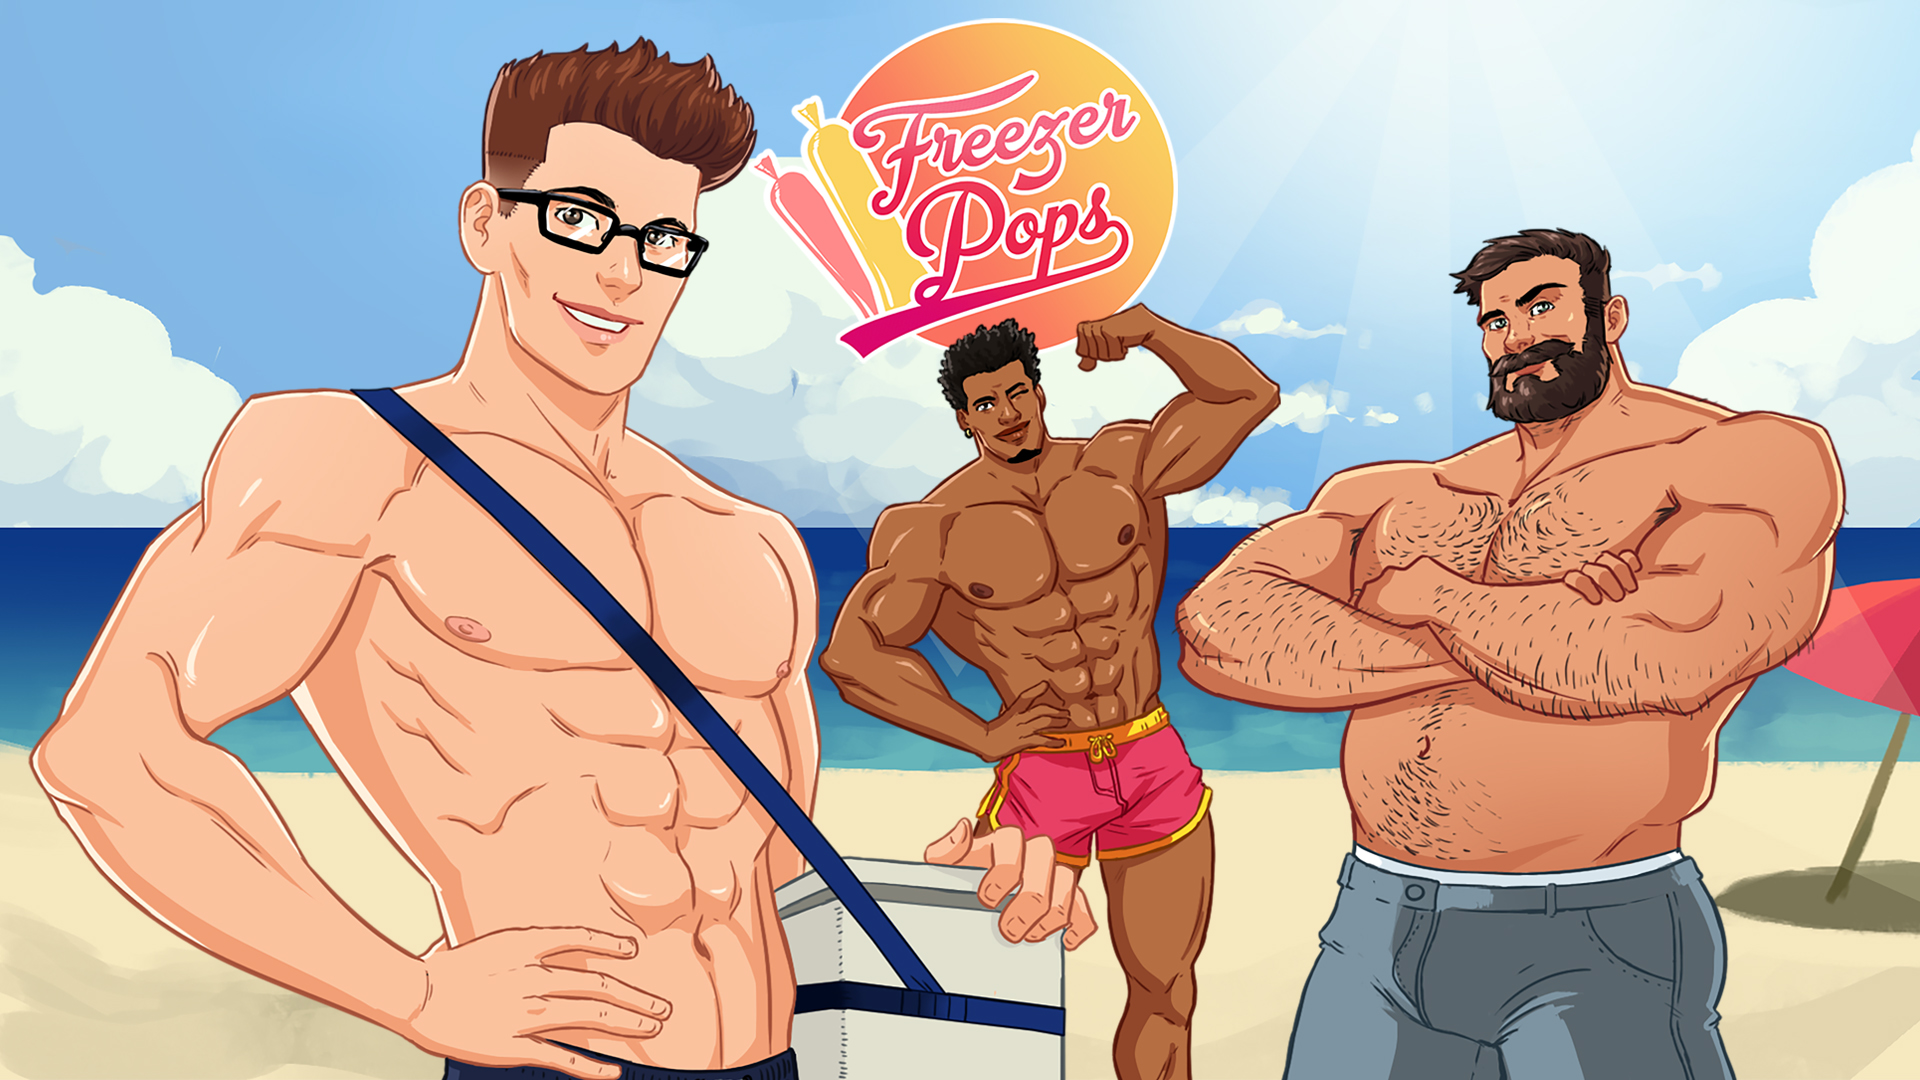 The Freezer Pops logo appears at the centre of the top of the frame. There are three men on a beach: a white man holding a cooler, a black man posing, and a very tanned man looking gruff.